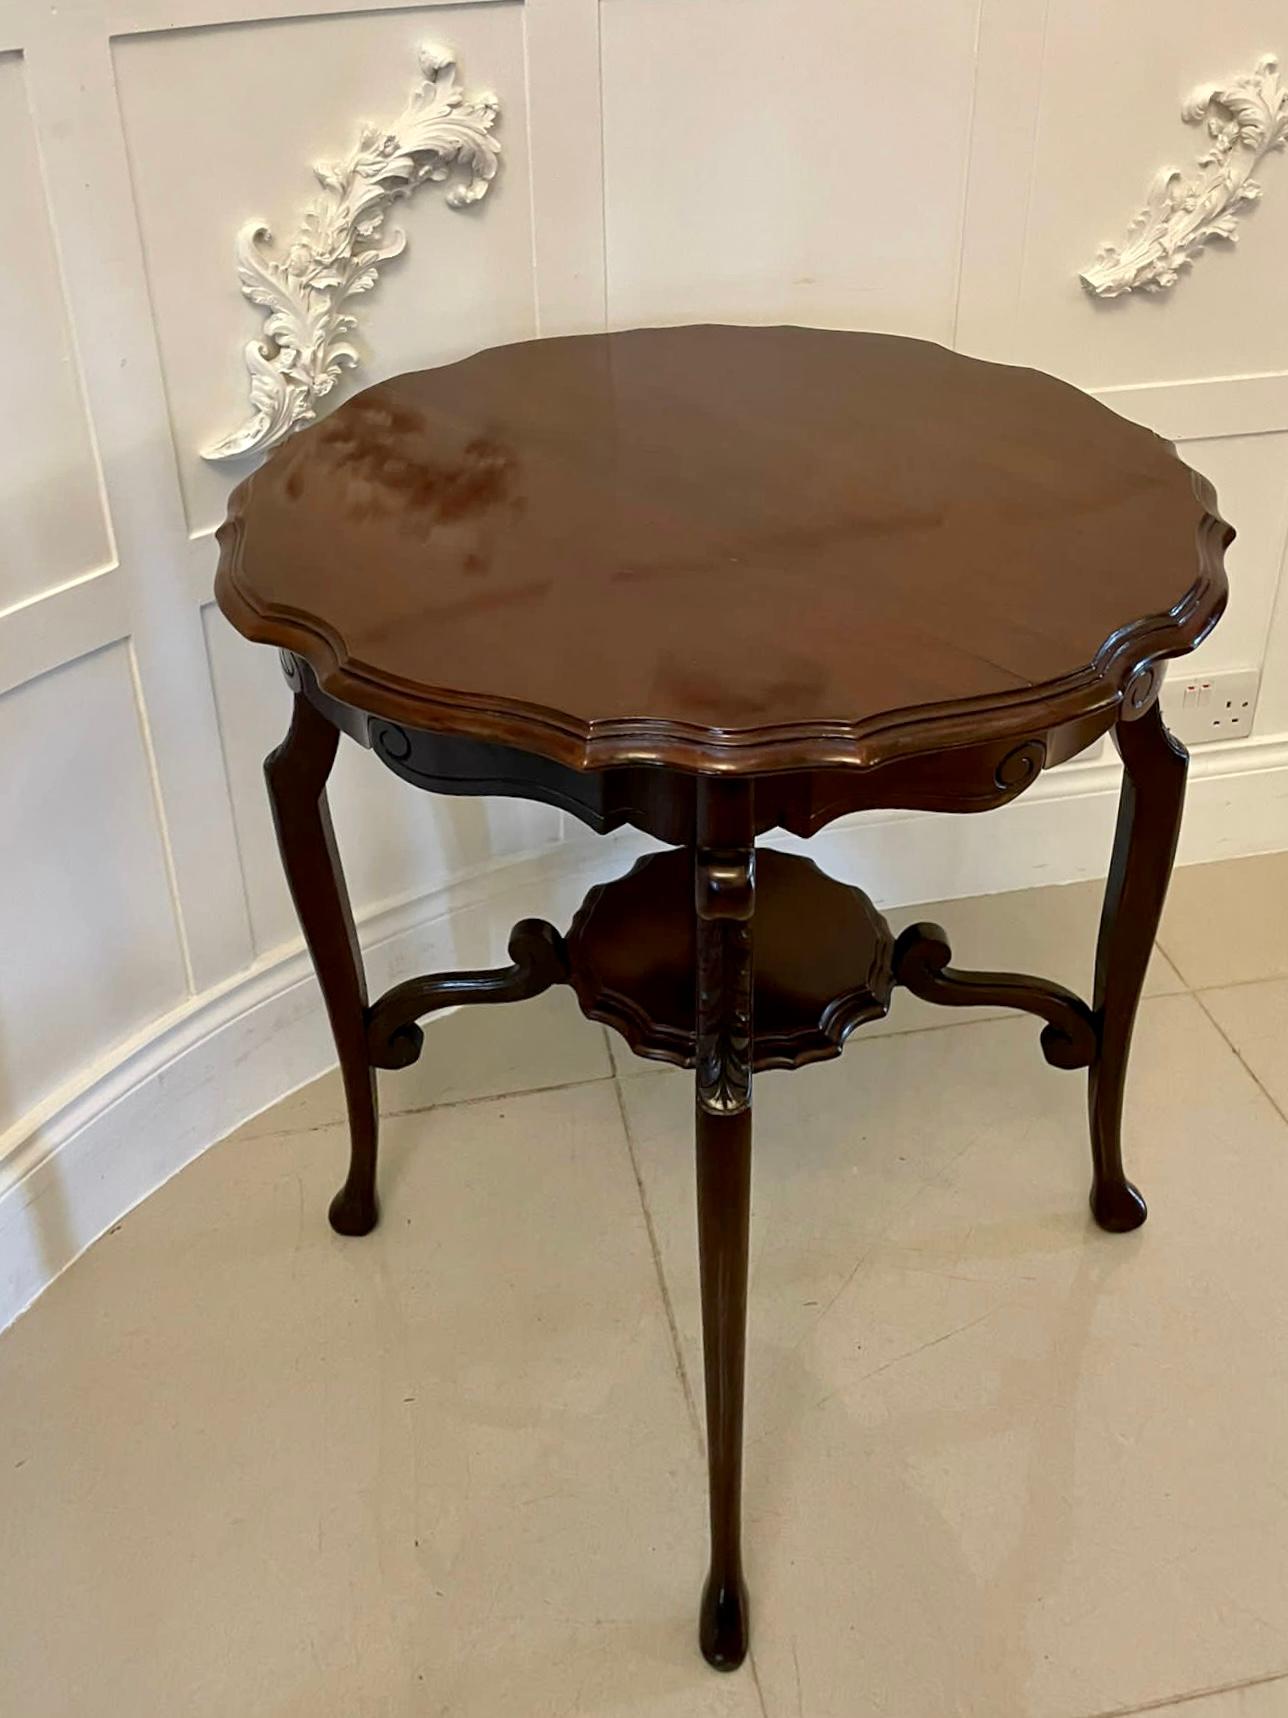 Antique Edwardian mahogany centre / lamp table with an attractive shaped top supported by four shaped carved cabriole legs with pad feet united by four shaped stretchers and a shaped under- tier.

A delightful example in lovely original